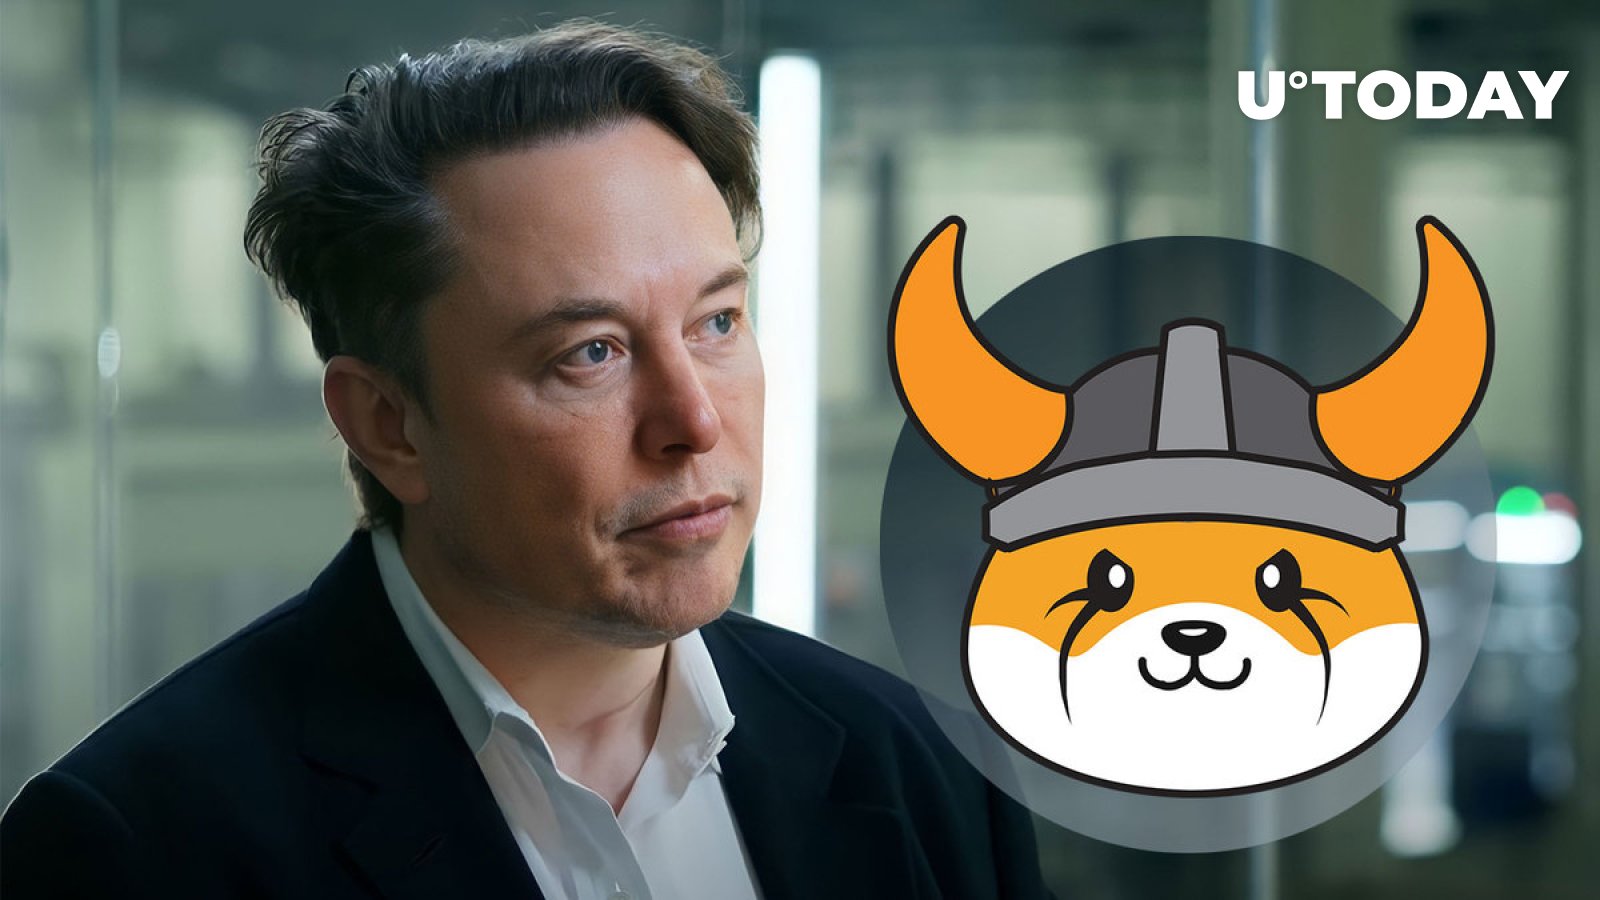 Floki Inu (FLOKI) Spikes 38% After Tagging Elon Musk and Kucoin Listing: Details